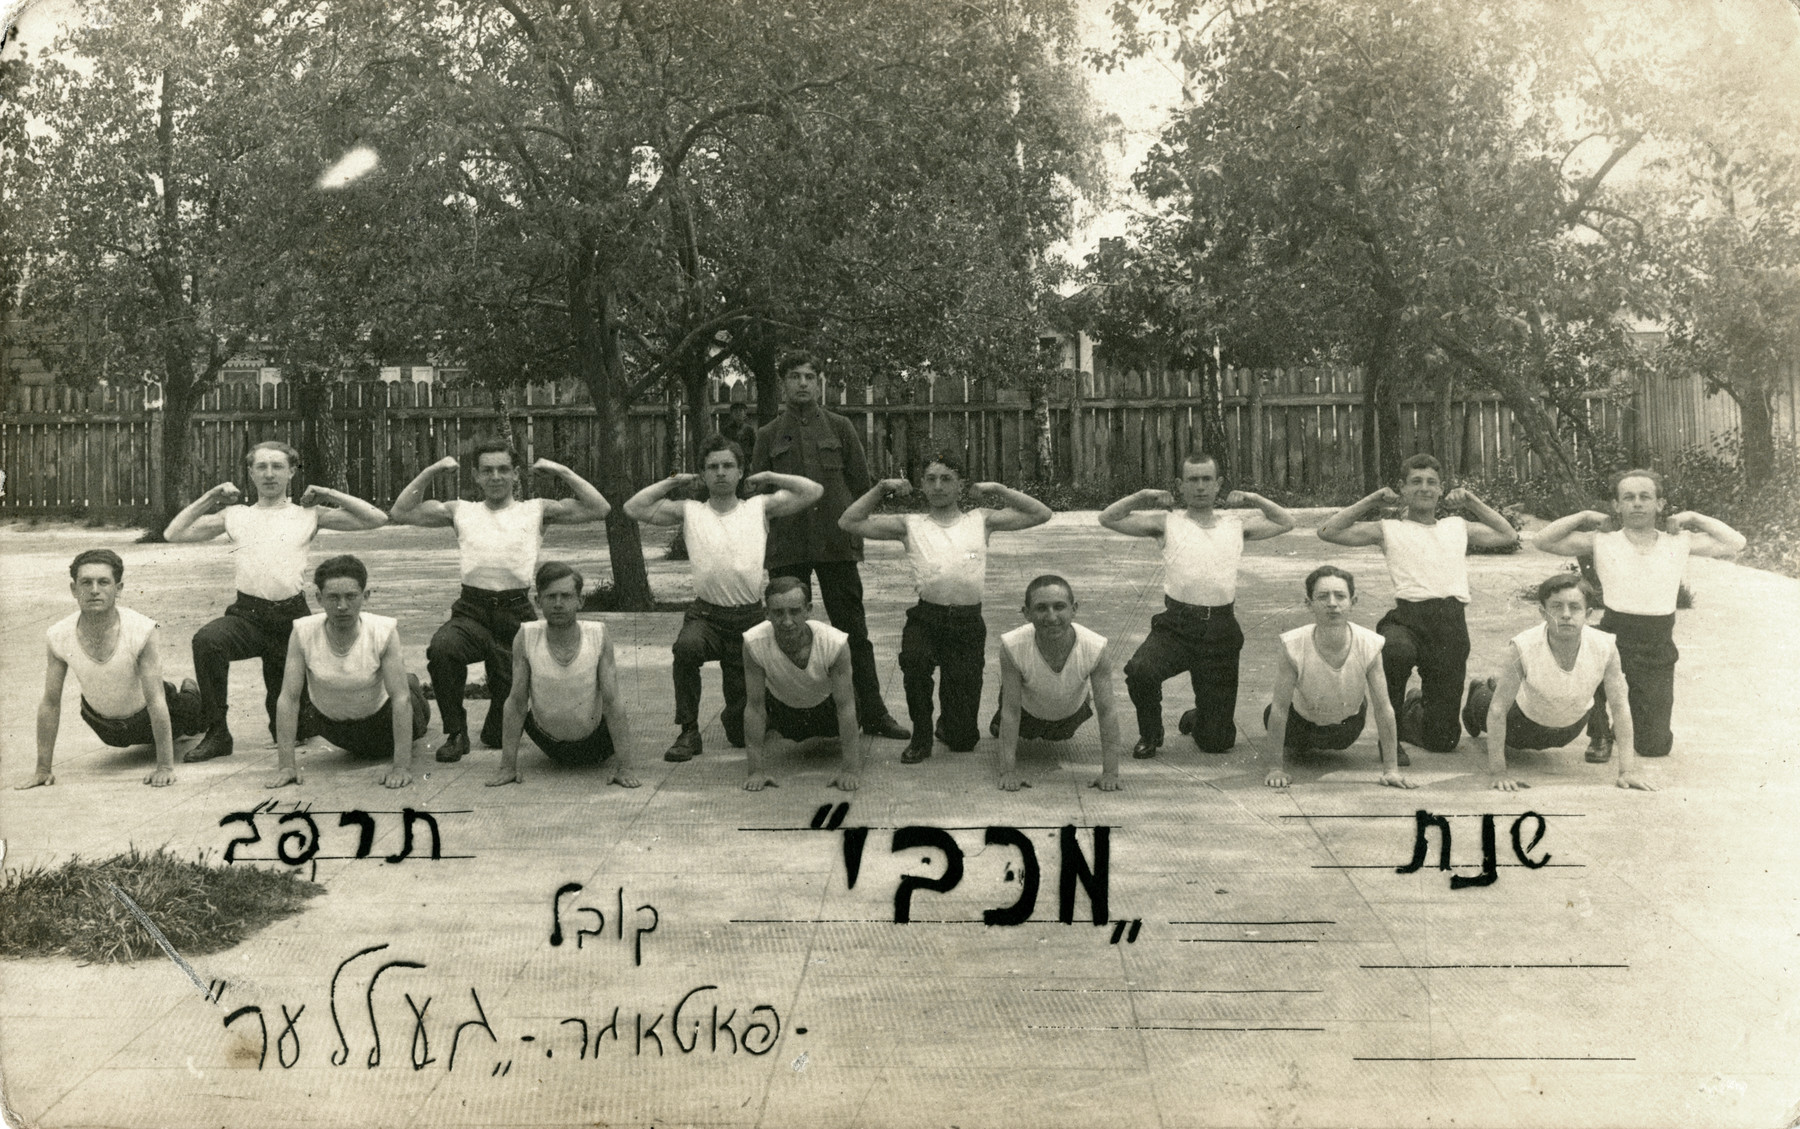 Group portrait of the Maccabi gymnastics club in Kowel.

Feivel Frankfowicz is pictured on the far right.